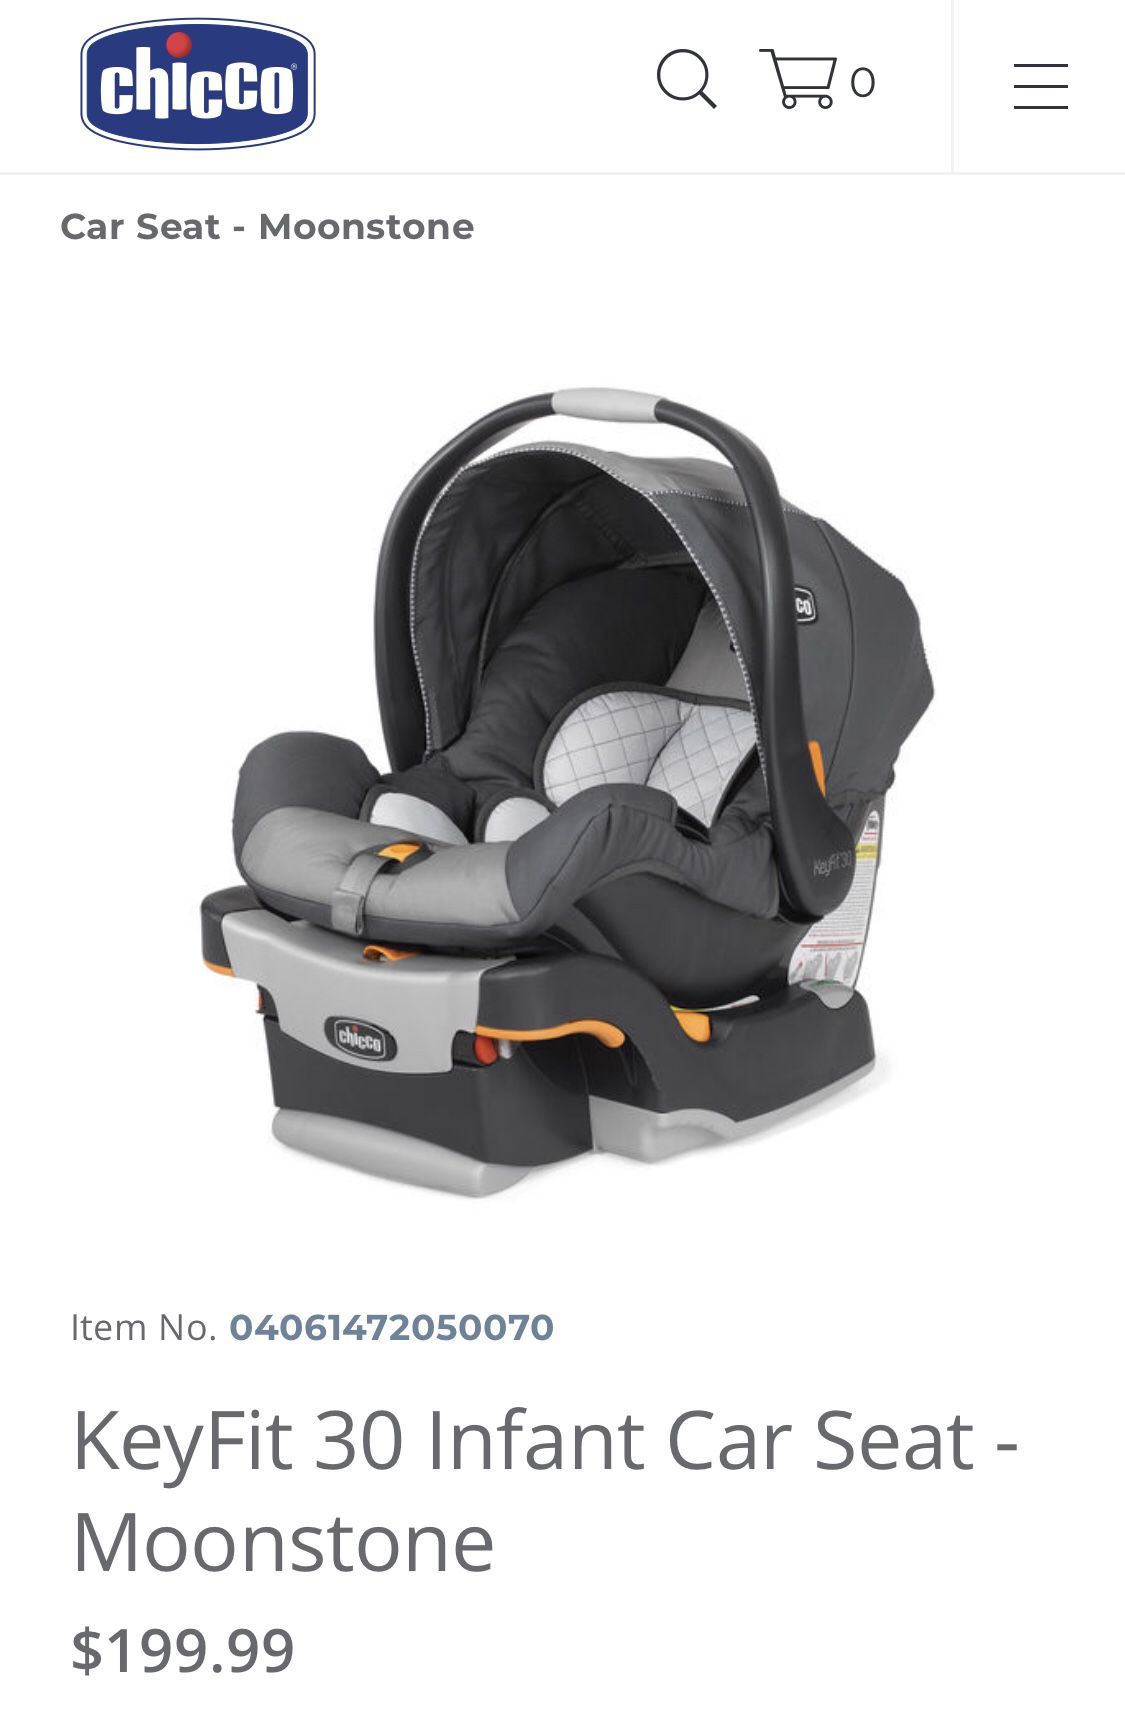 KeyFit 30 Infant Car Seat - #1-rated Infant Car Seat in America!